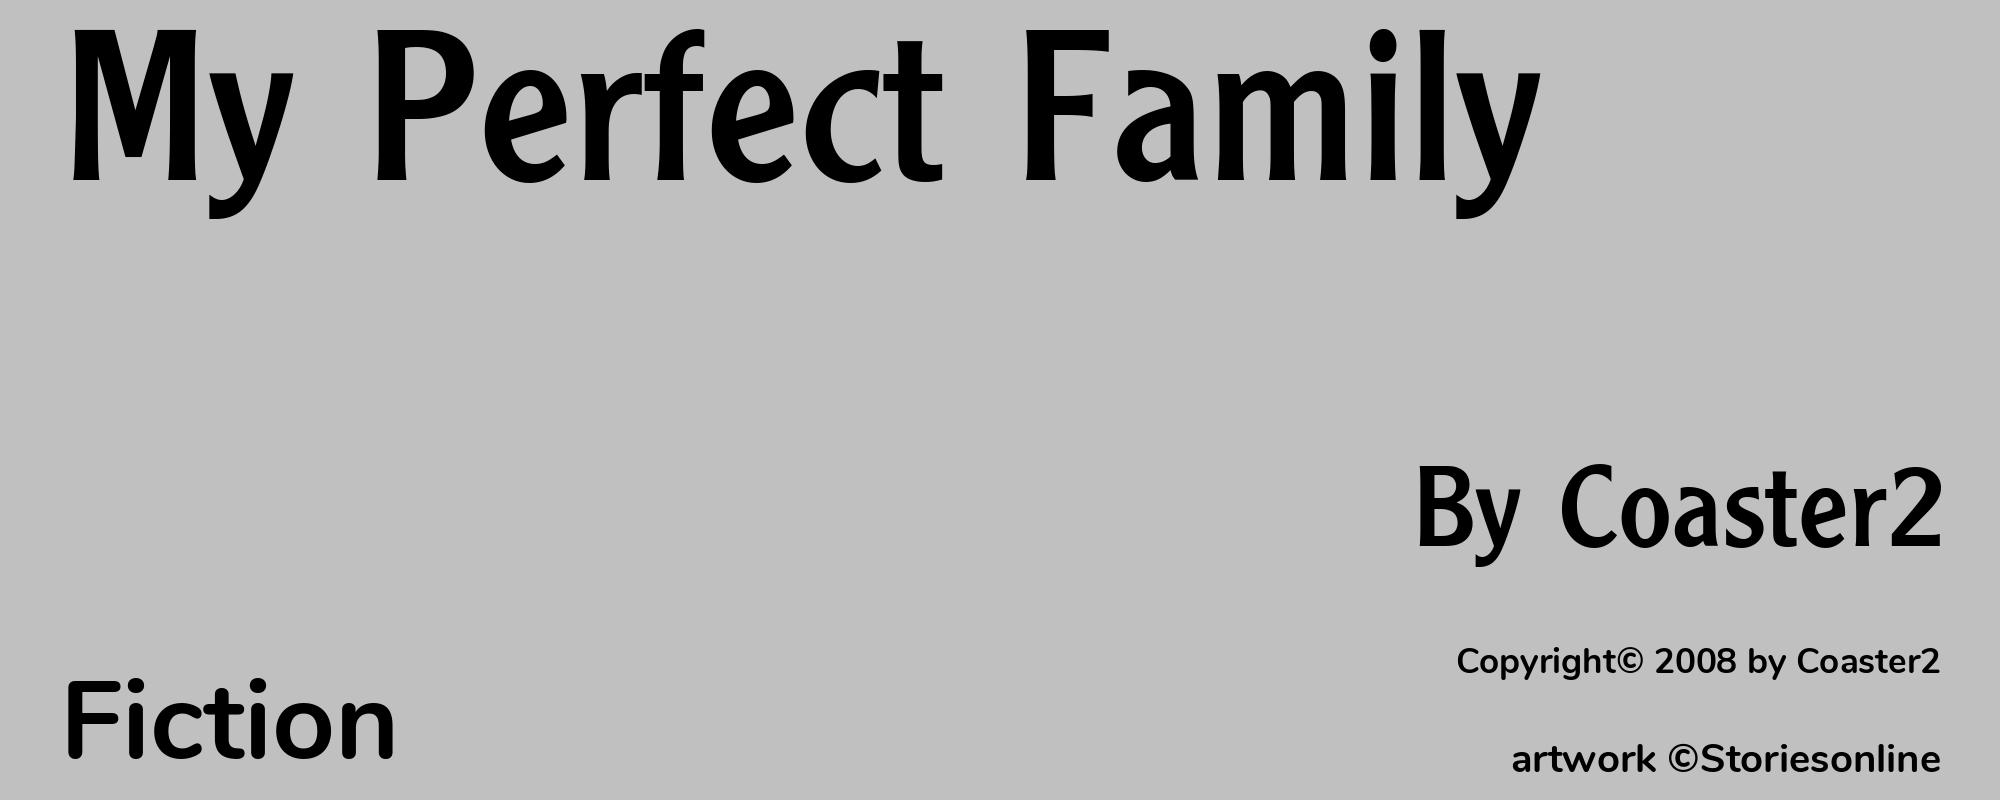 My Perfect Family - Cover